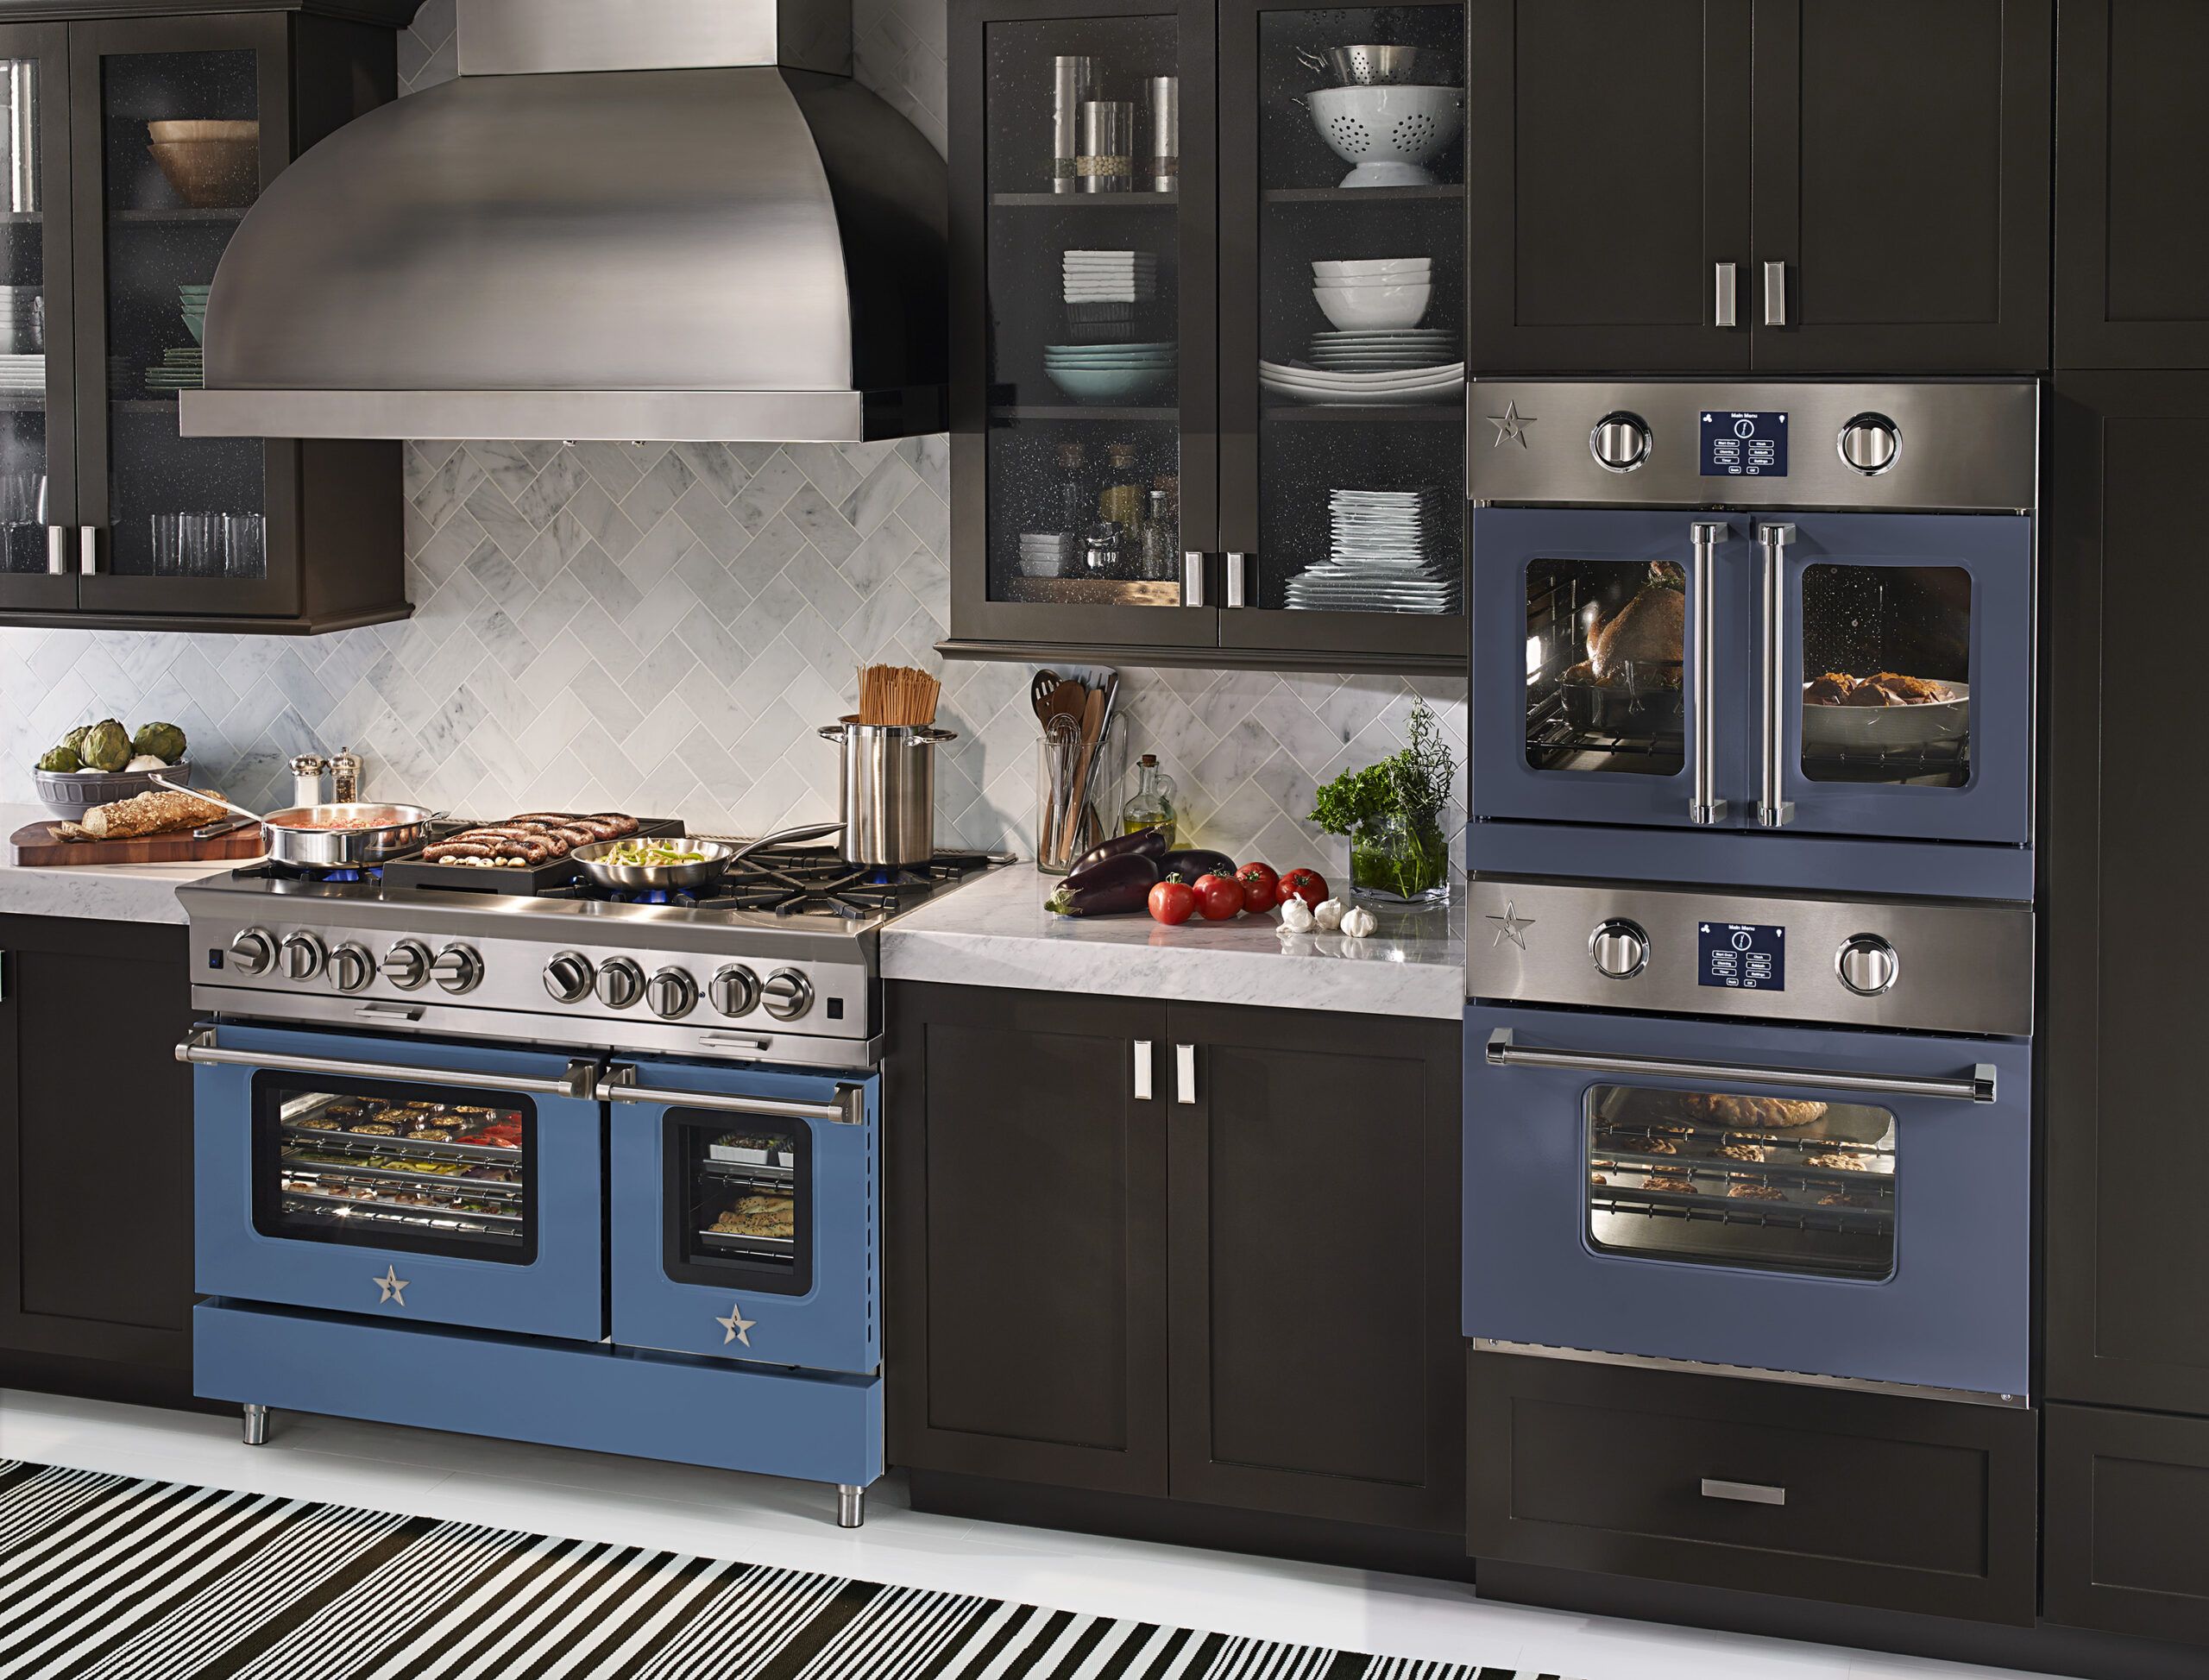 The Chef Inspired Electric Kitchen - BlueStar